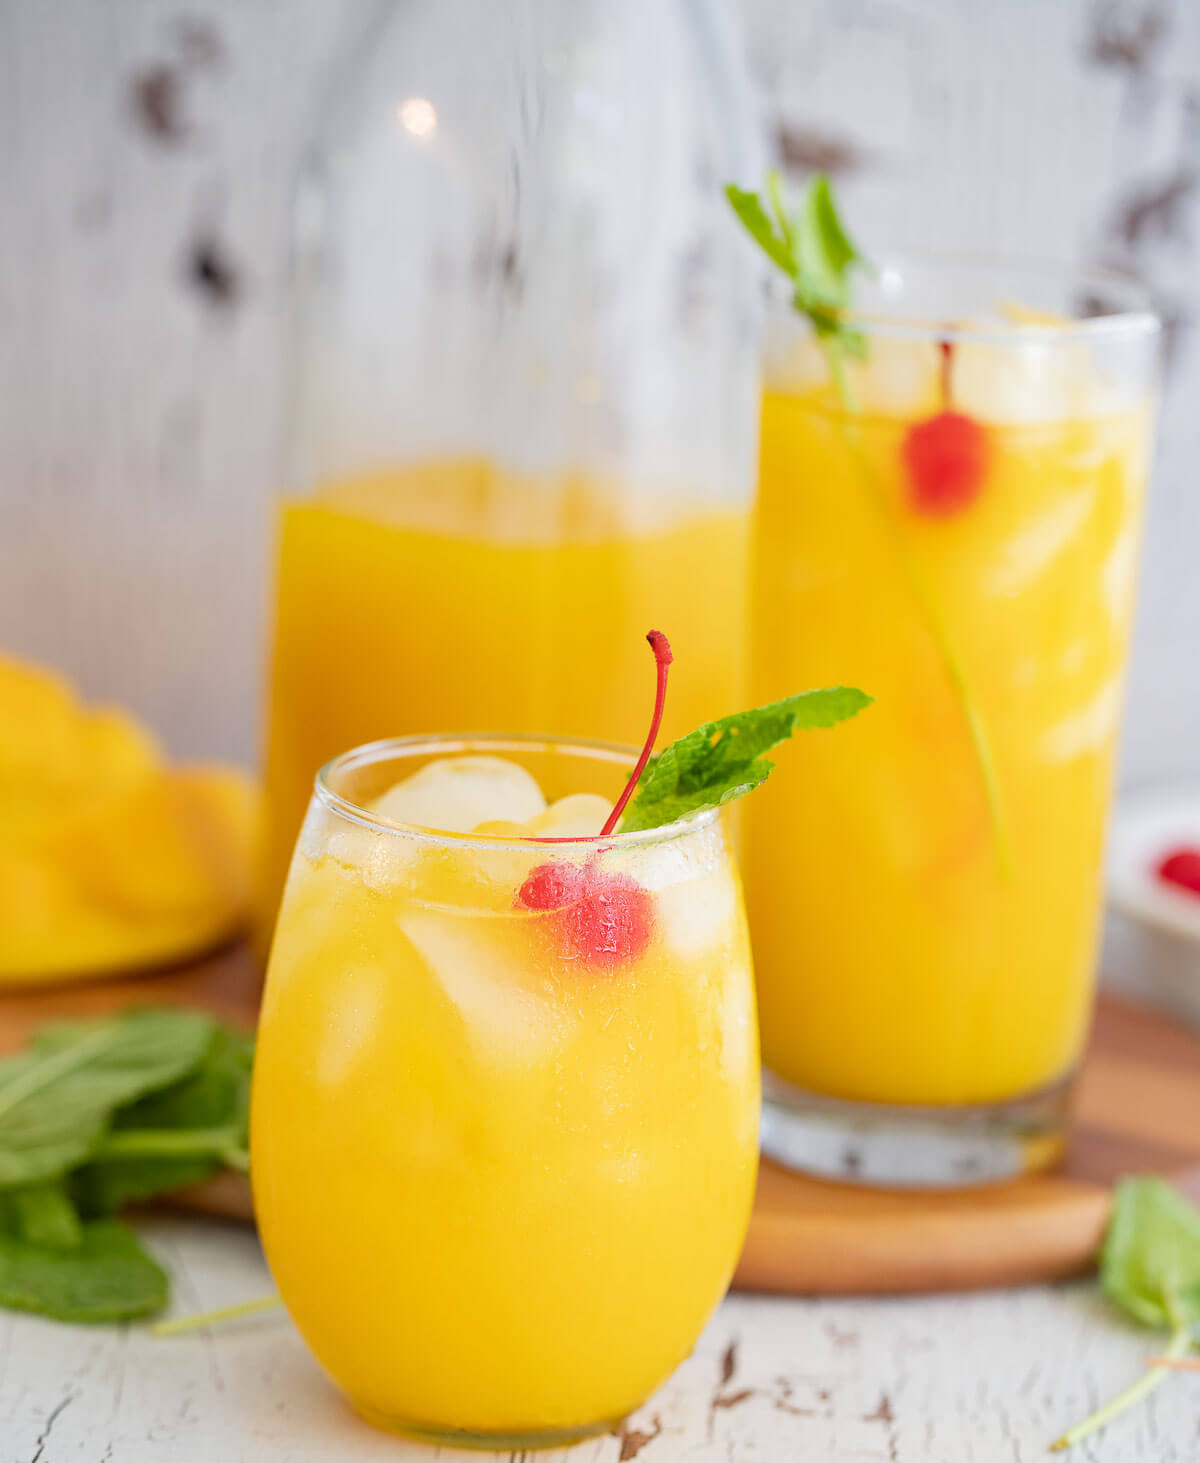 summer: 4 easy fresh fruit juices to quench your thirst